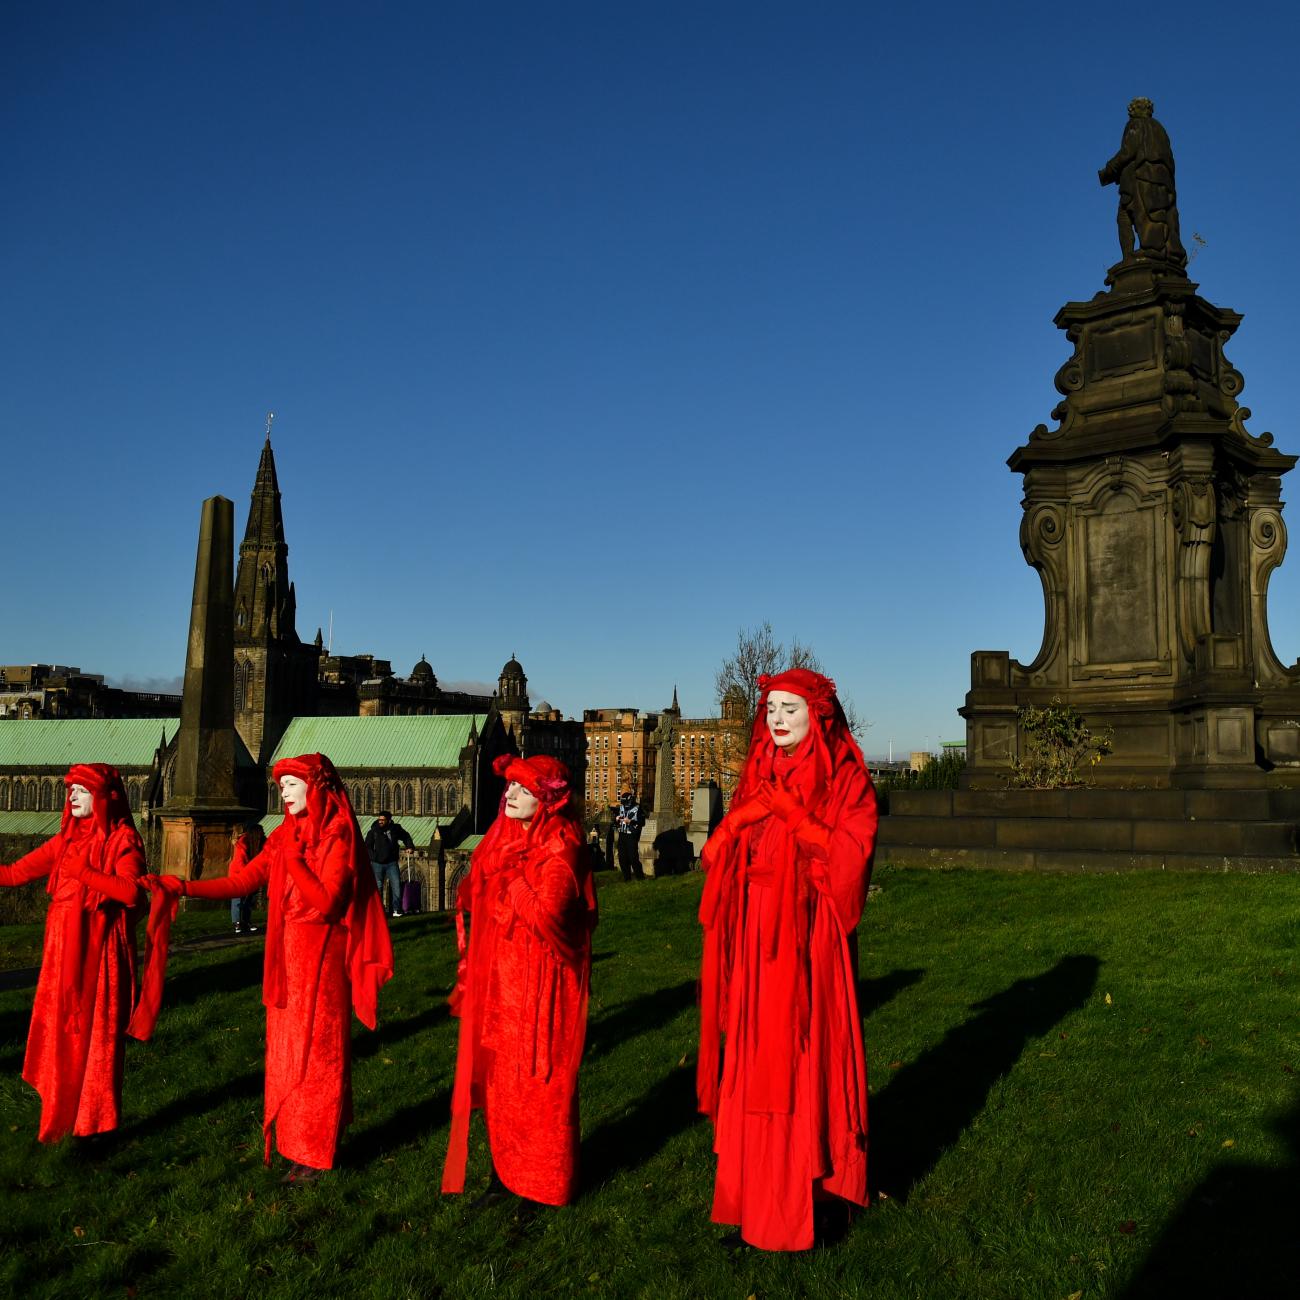 Activists take part in a mock funeral at Glasgow Necropolis during the UN Climate Change Conference (COP26) in Glasgow, Scotland, Britain November 13, 2021.